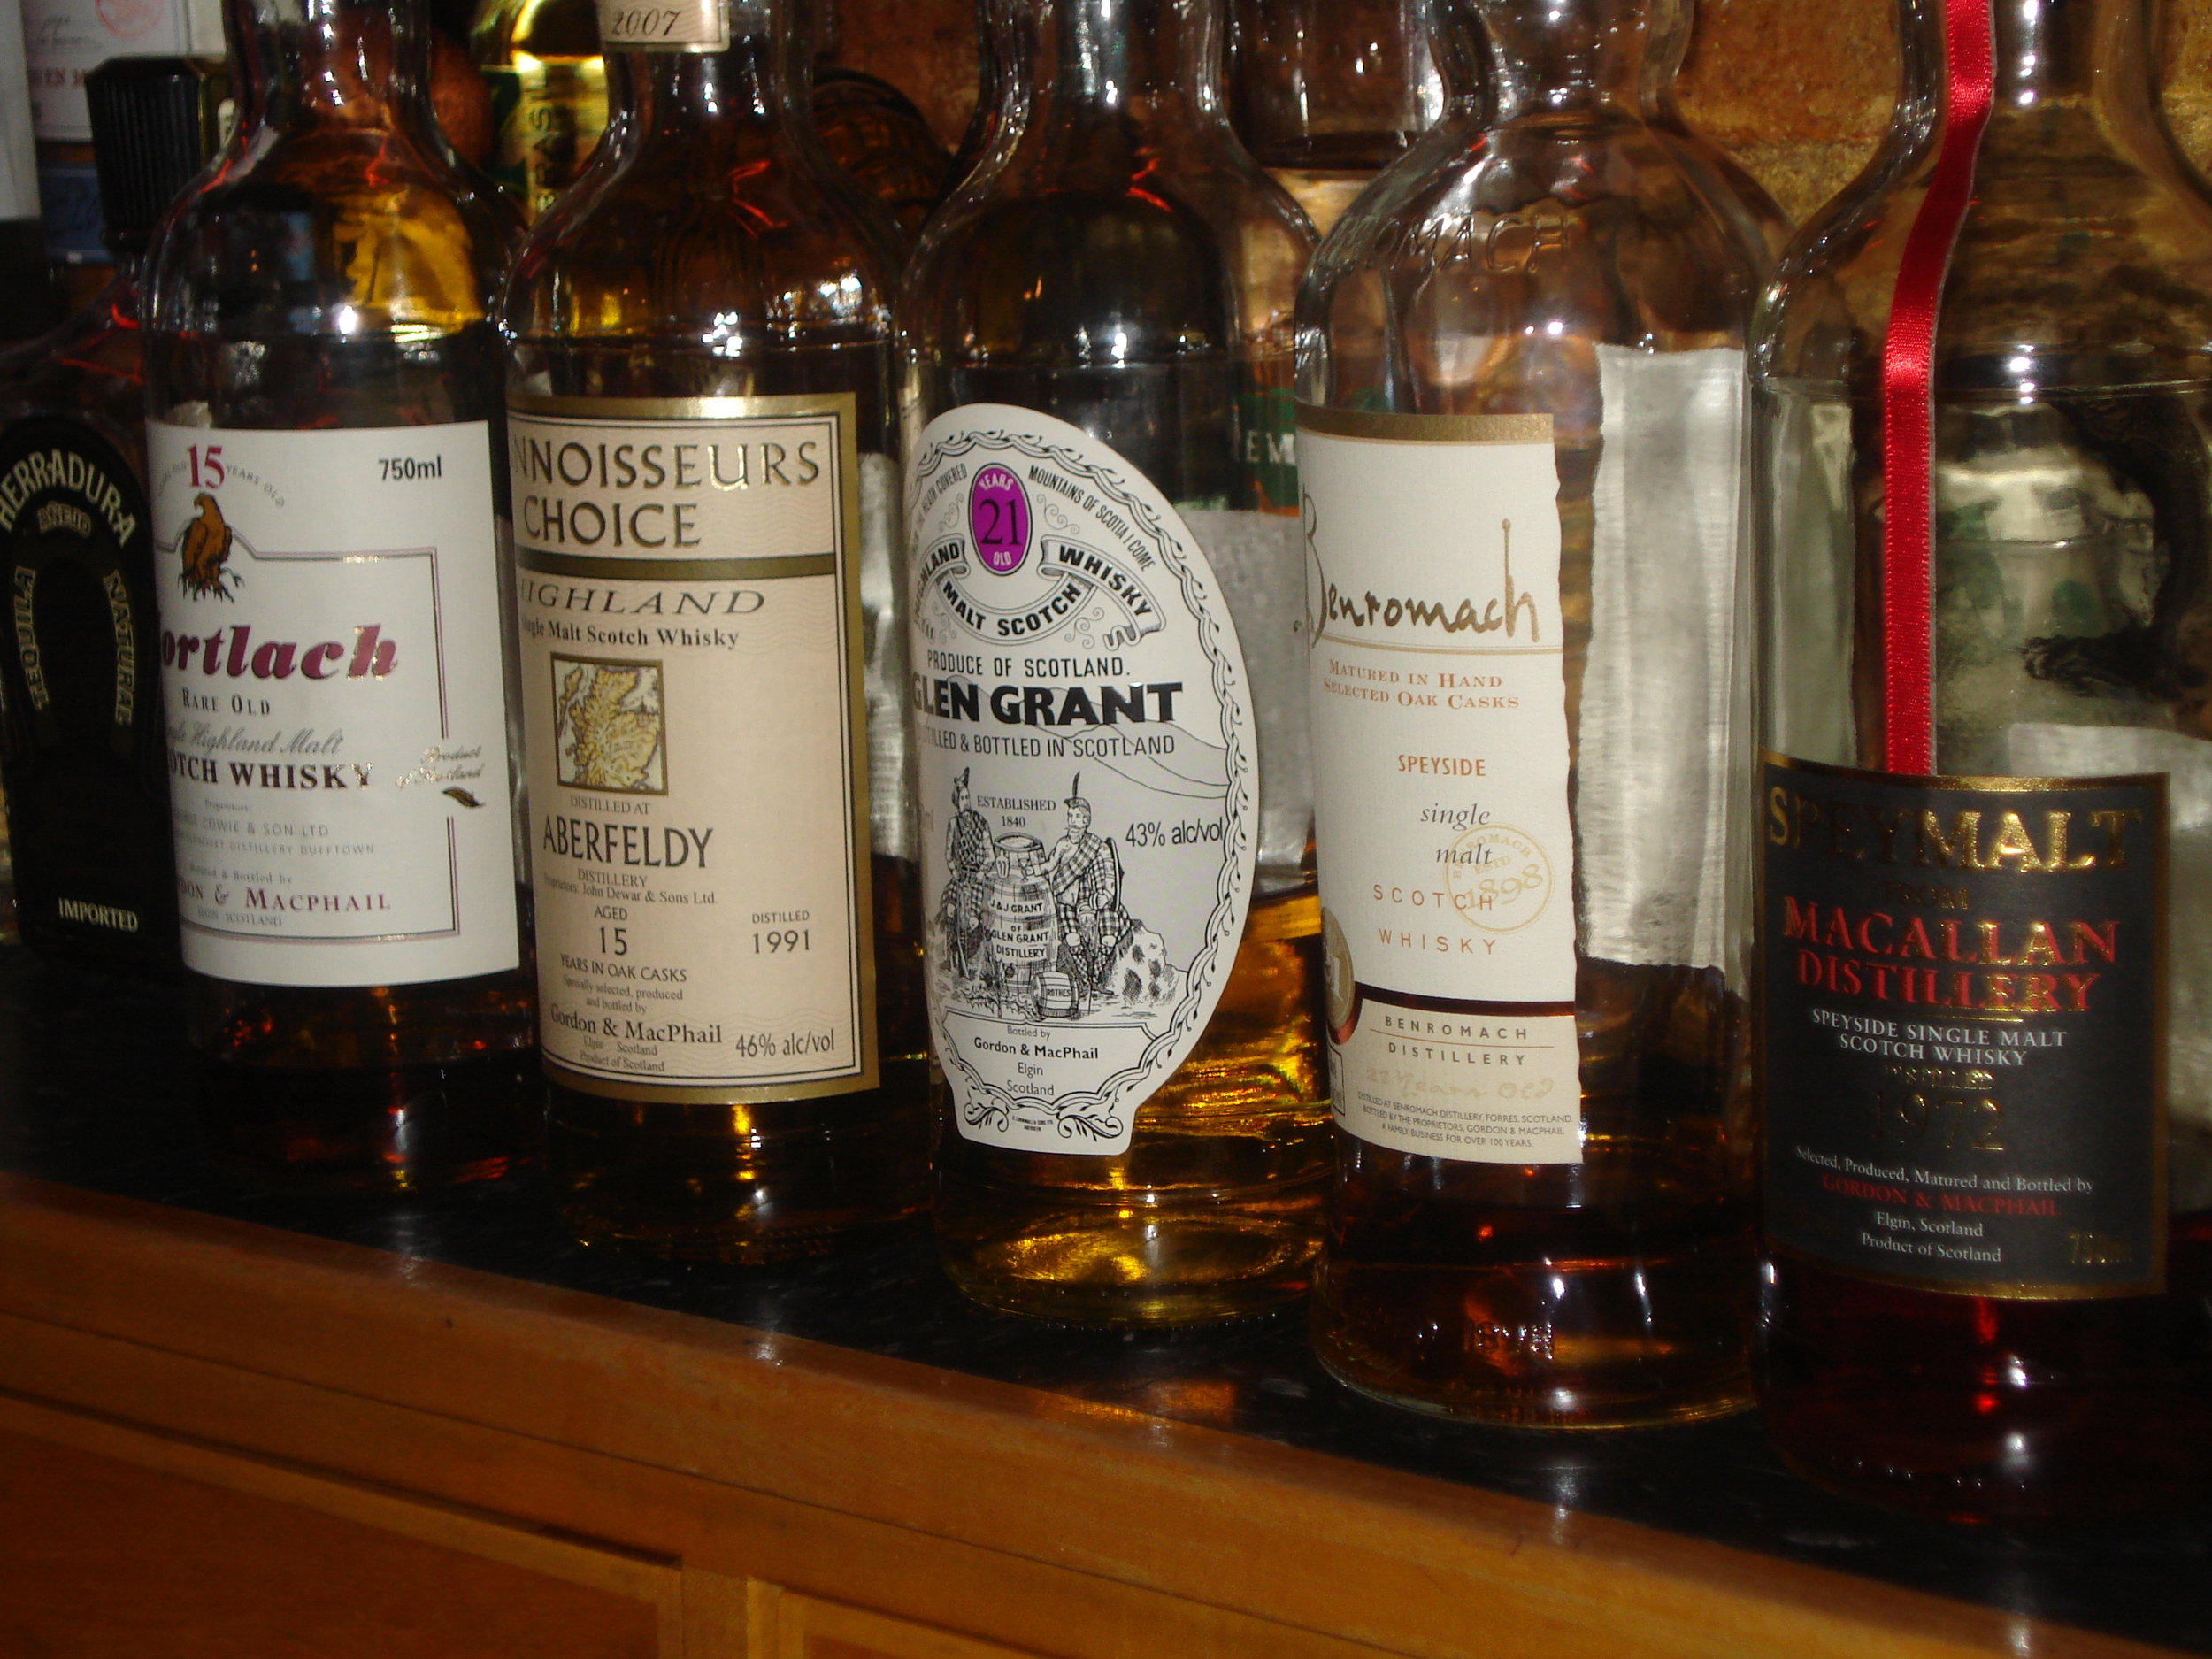 Just over half of the bottles sampled Tuesday night.